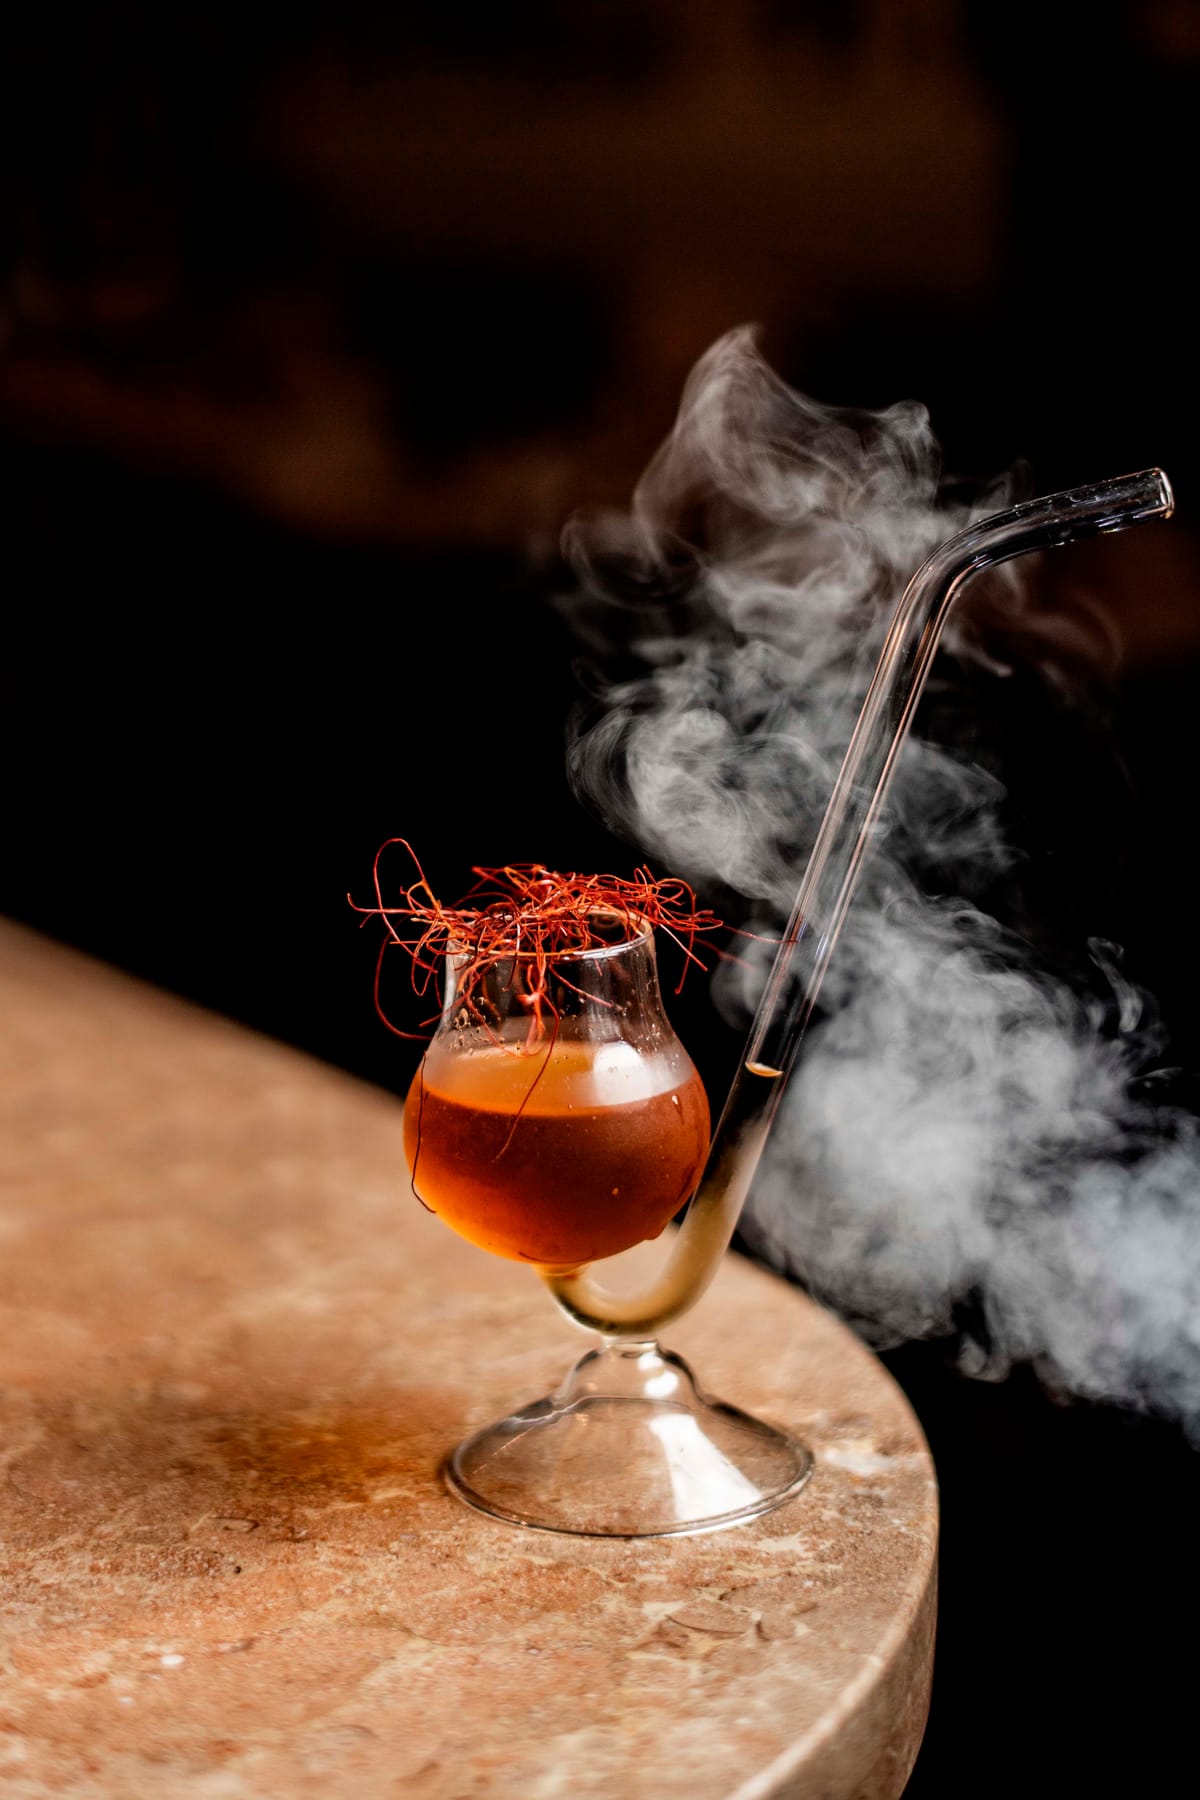 Get the recipe for Up In Smoke from Banco, Manly